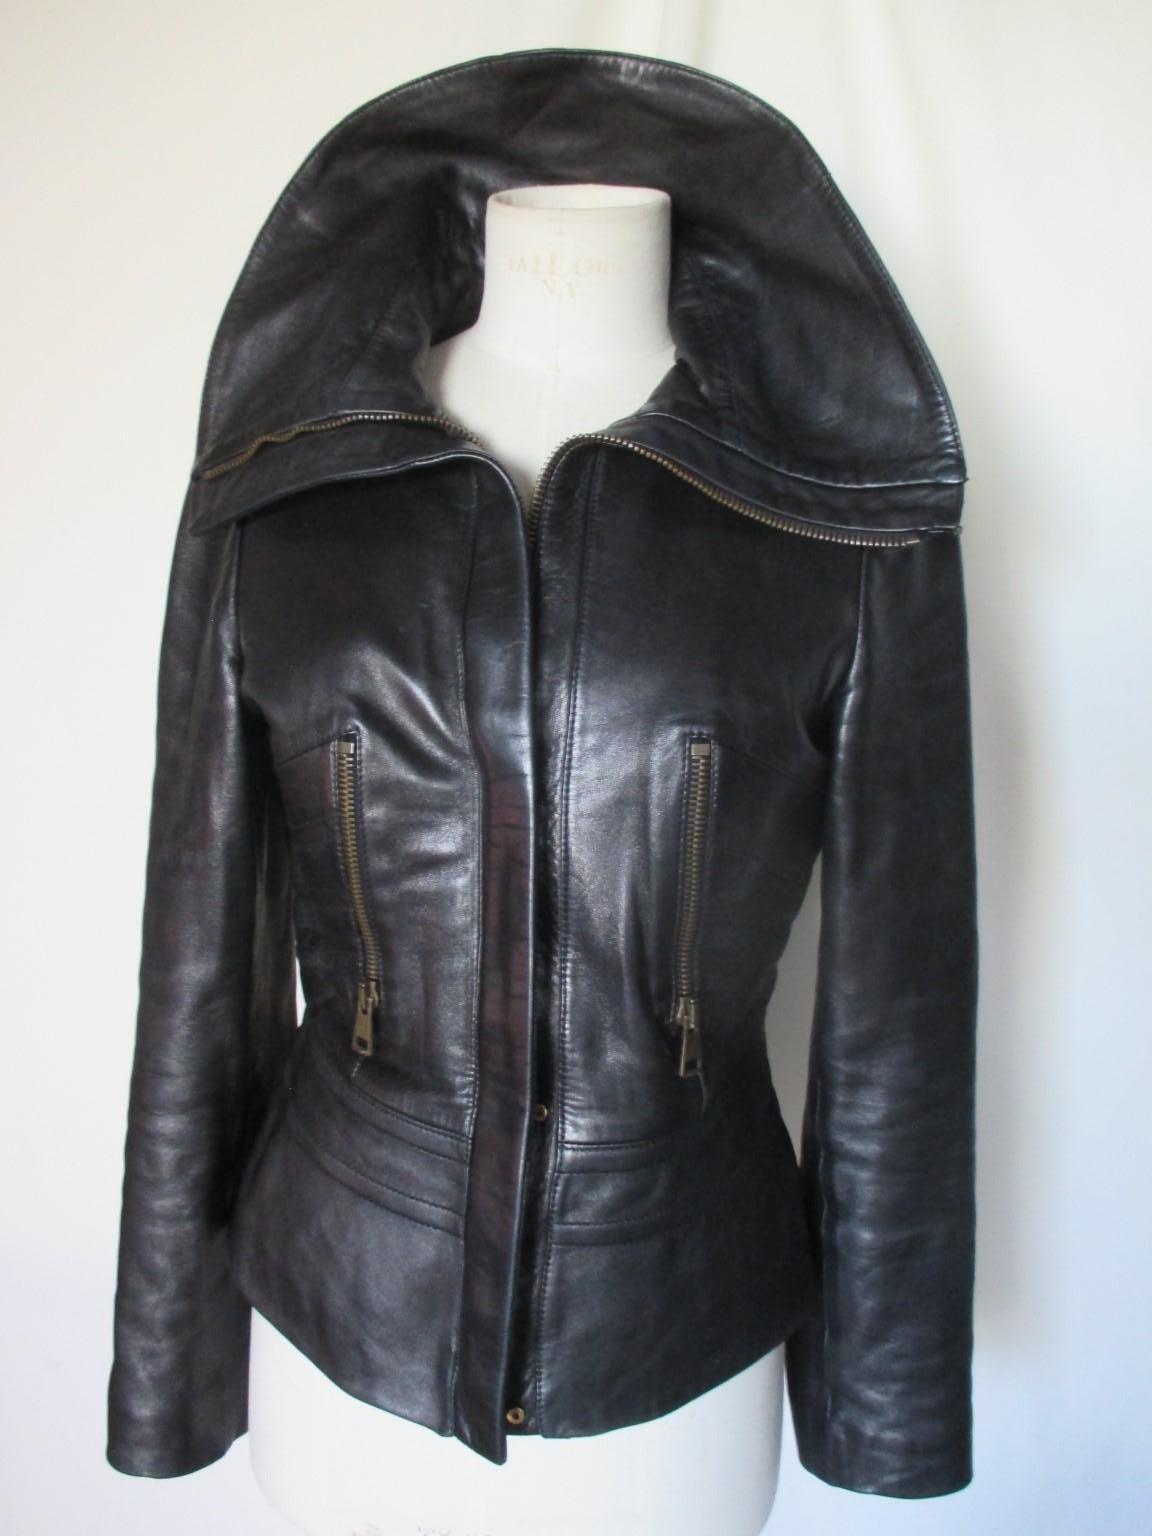 This Gucci black leather jacket is designed with a huge collar.

We offer more Gucci, Hermes and exclusive Fur items, view our frontstore.

Details:
Made of black soft quality leather, 
With a closing zipper, 2 zipper  pockets and 2 press